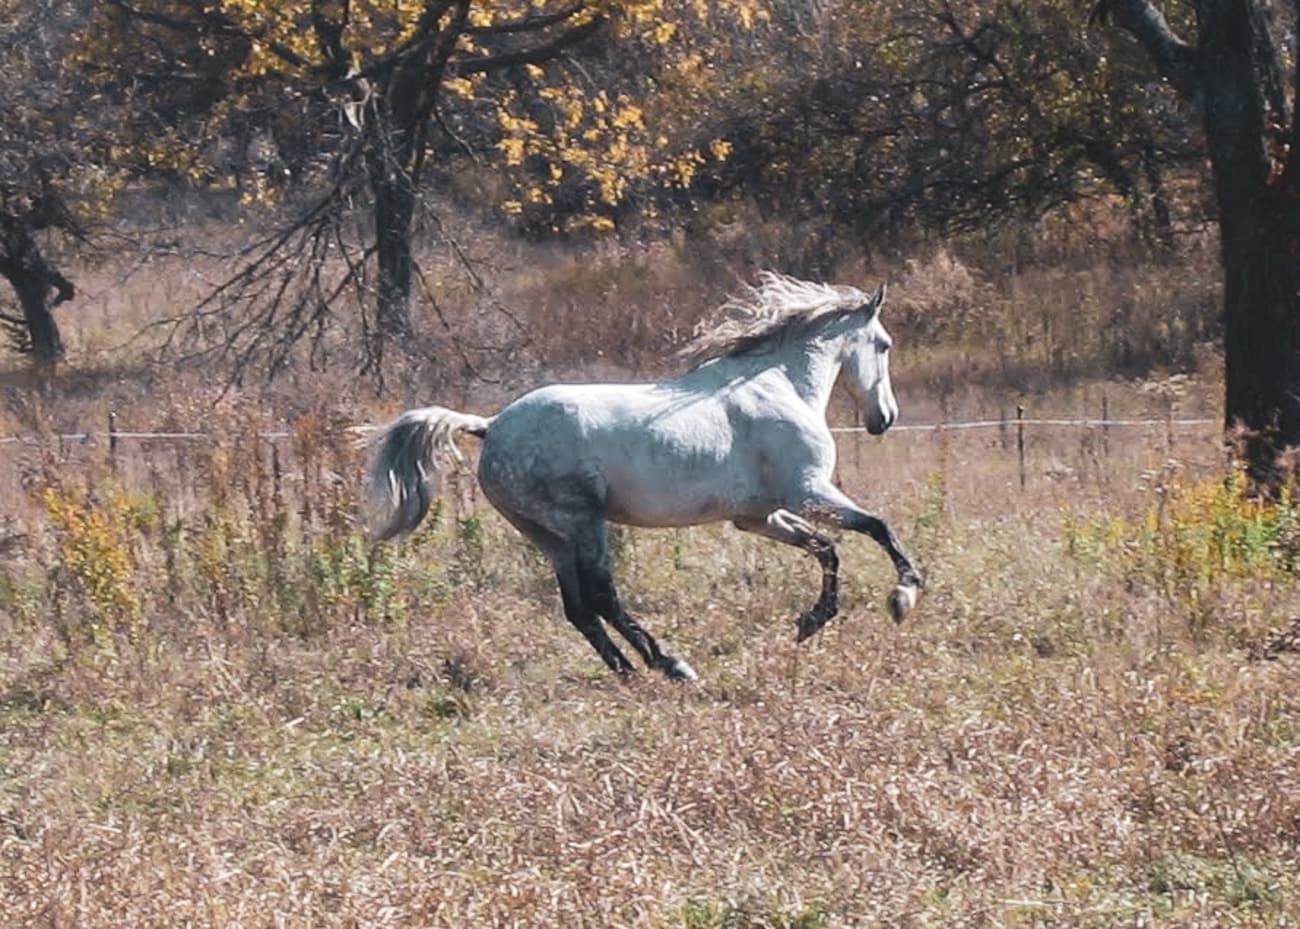 A horse loose in a pasture with a highly collected canter gait